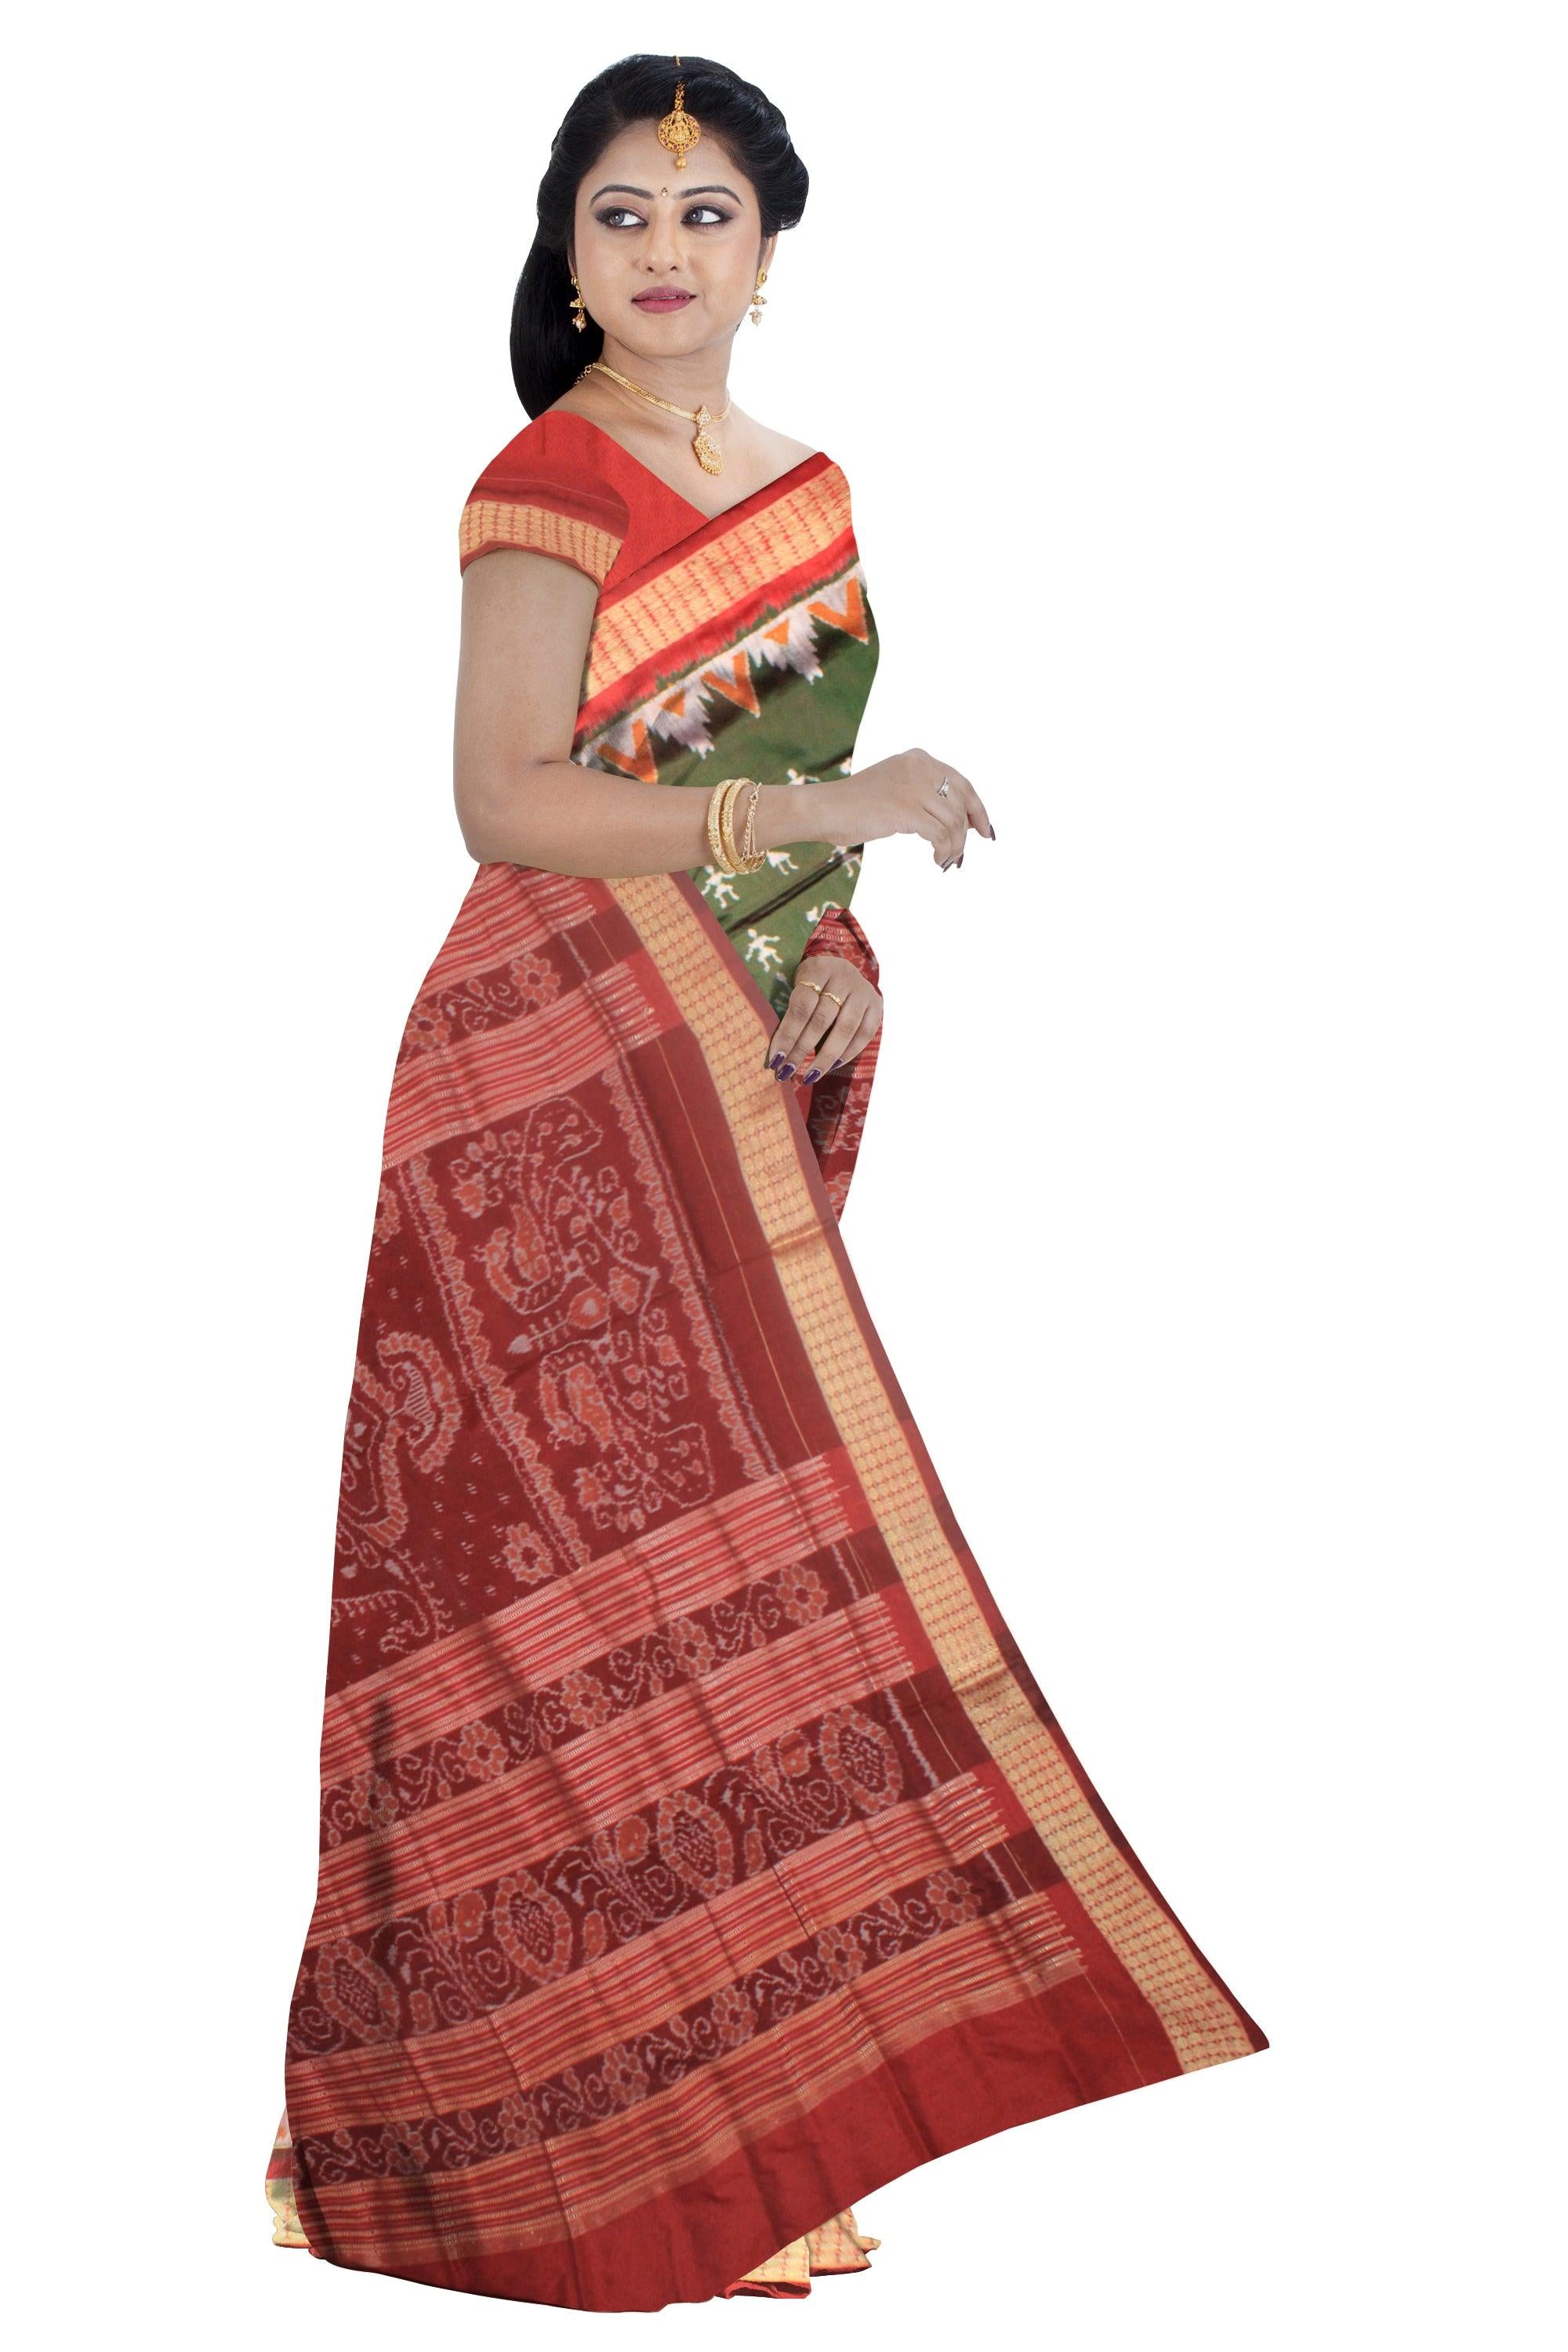 A SONEPUR PURE PATA SAREE IN MEHENDI AND RED COLOR, WITH BLOUSE PIECE. - Koshali Arts & Crafts Enterprise